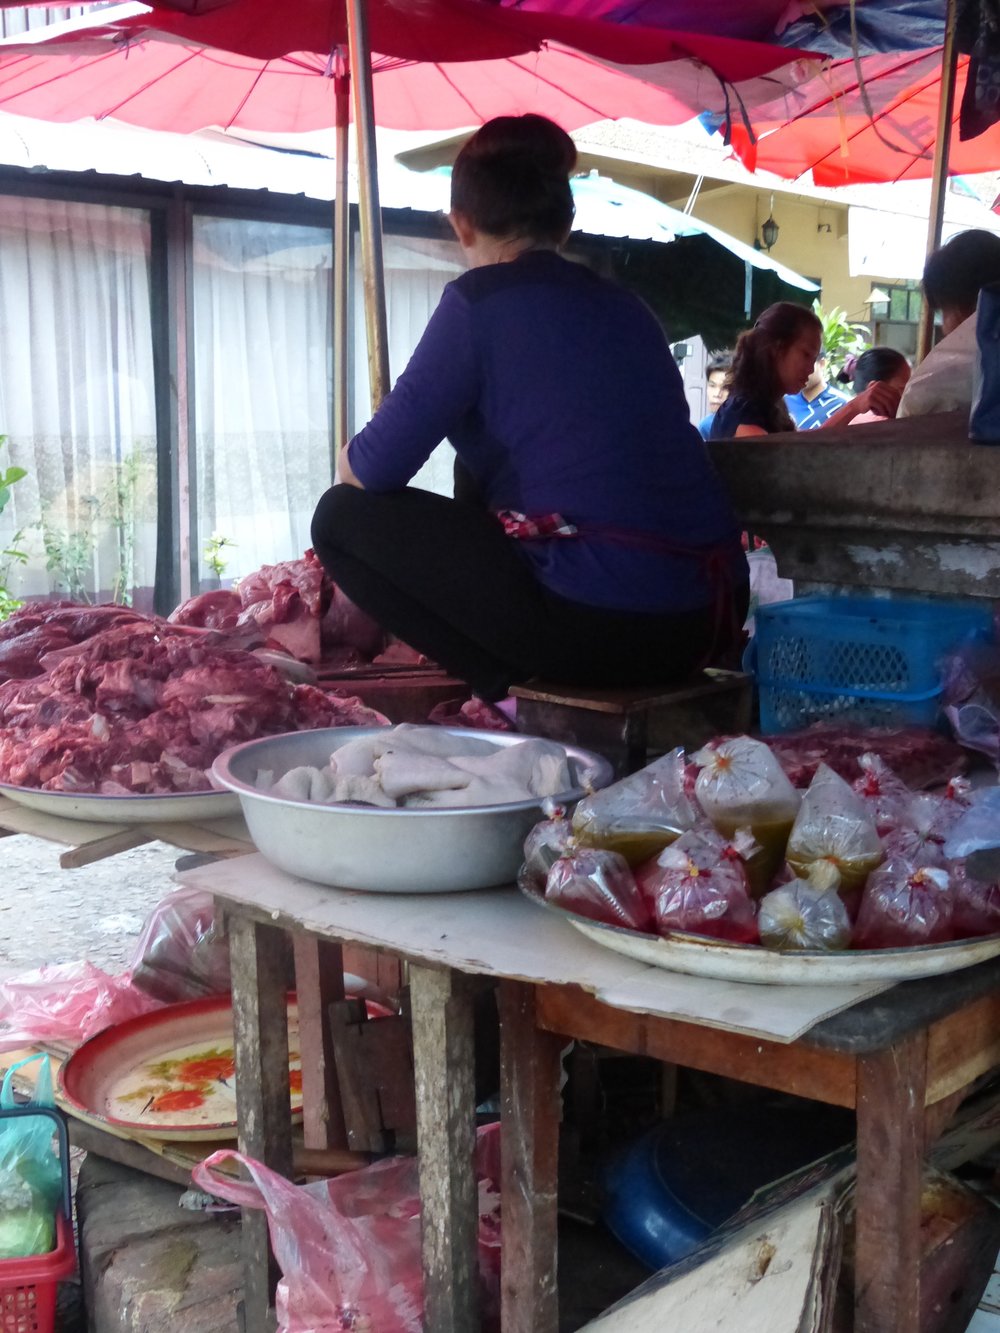 Wait, and butchers get up on the table in Laos?